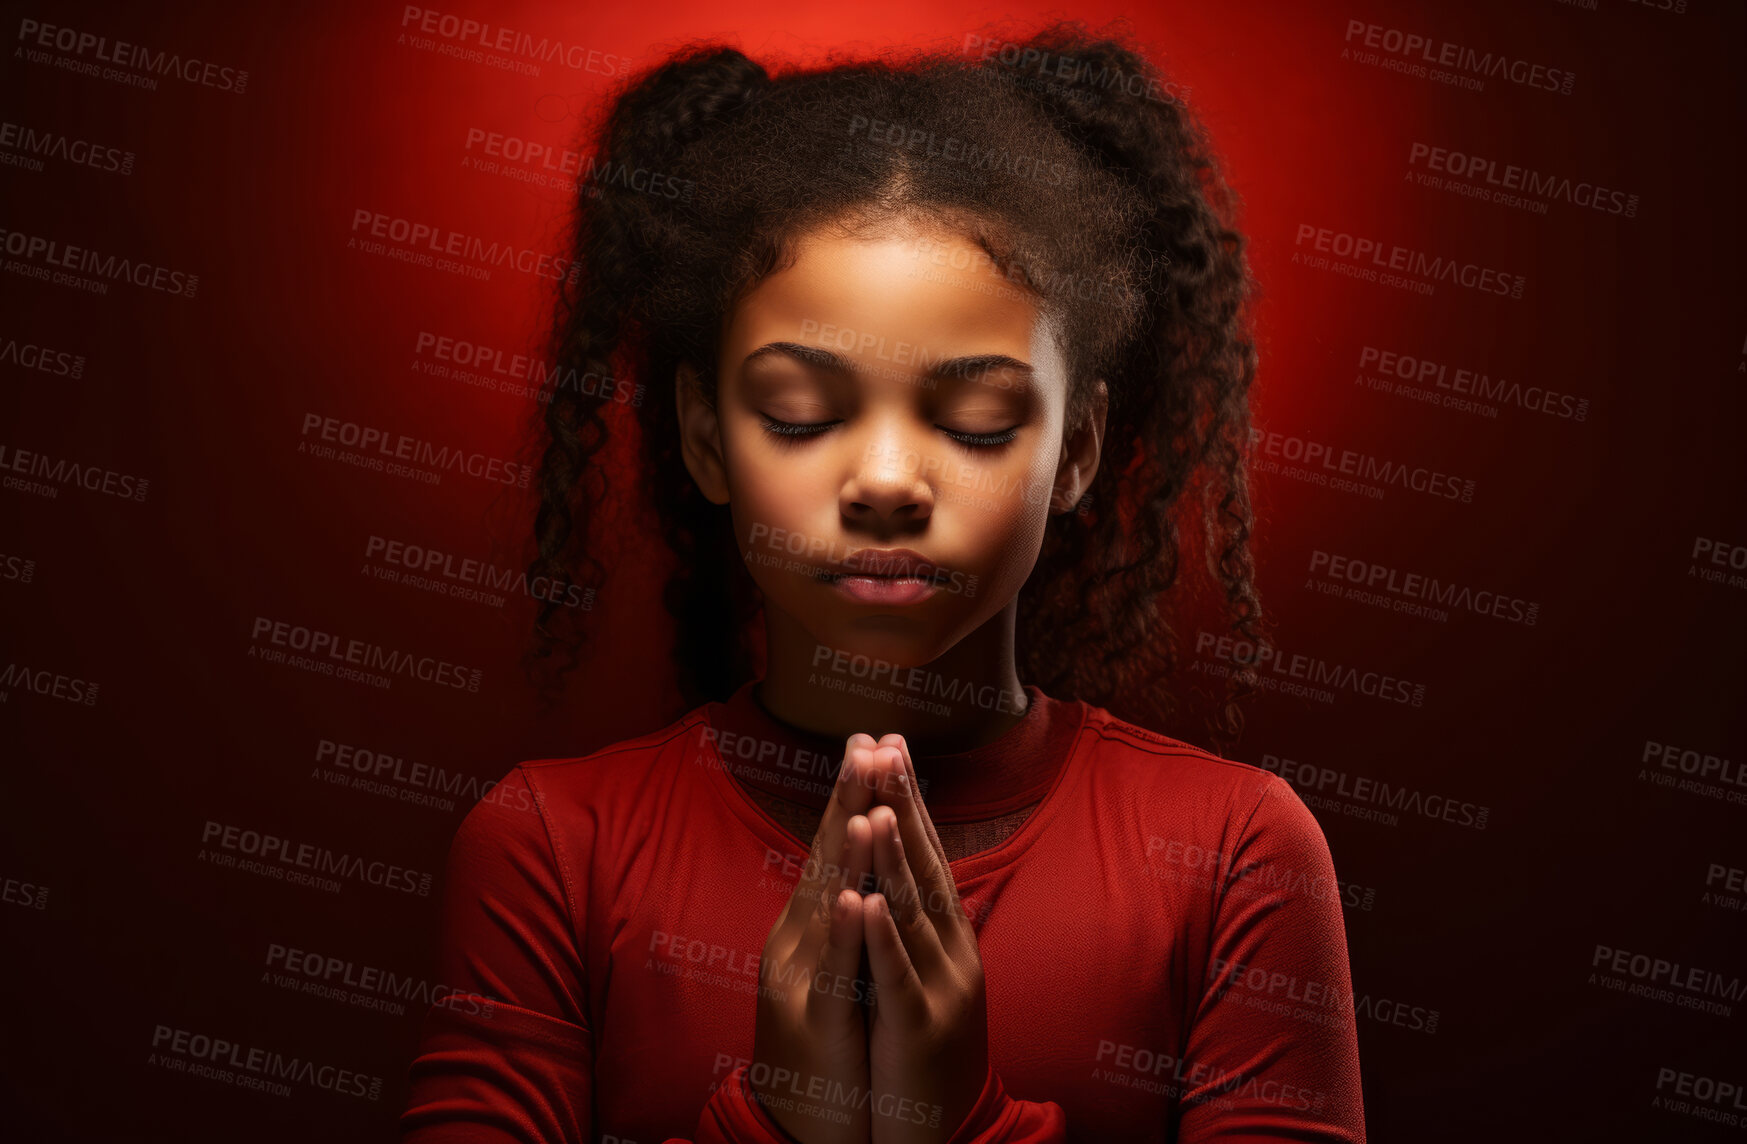 Buy stock photo African American child praying. Studio portrait. Red backdrop. Religion concept.